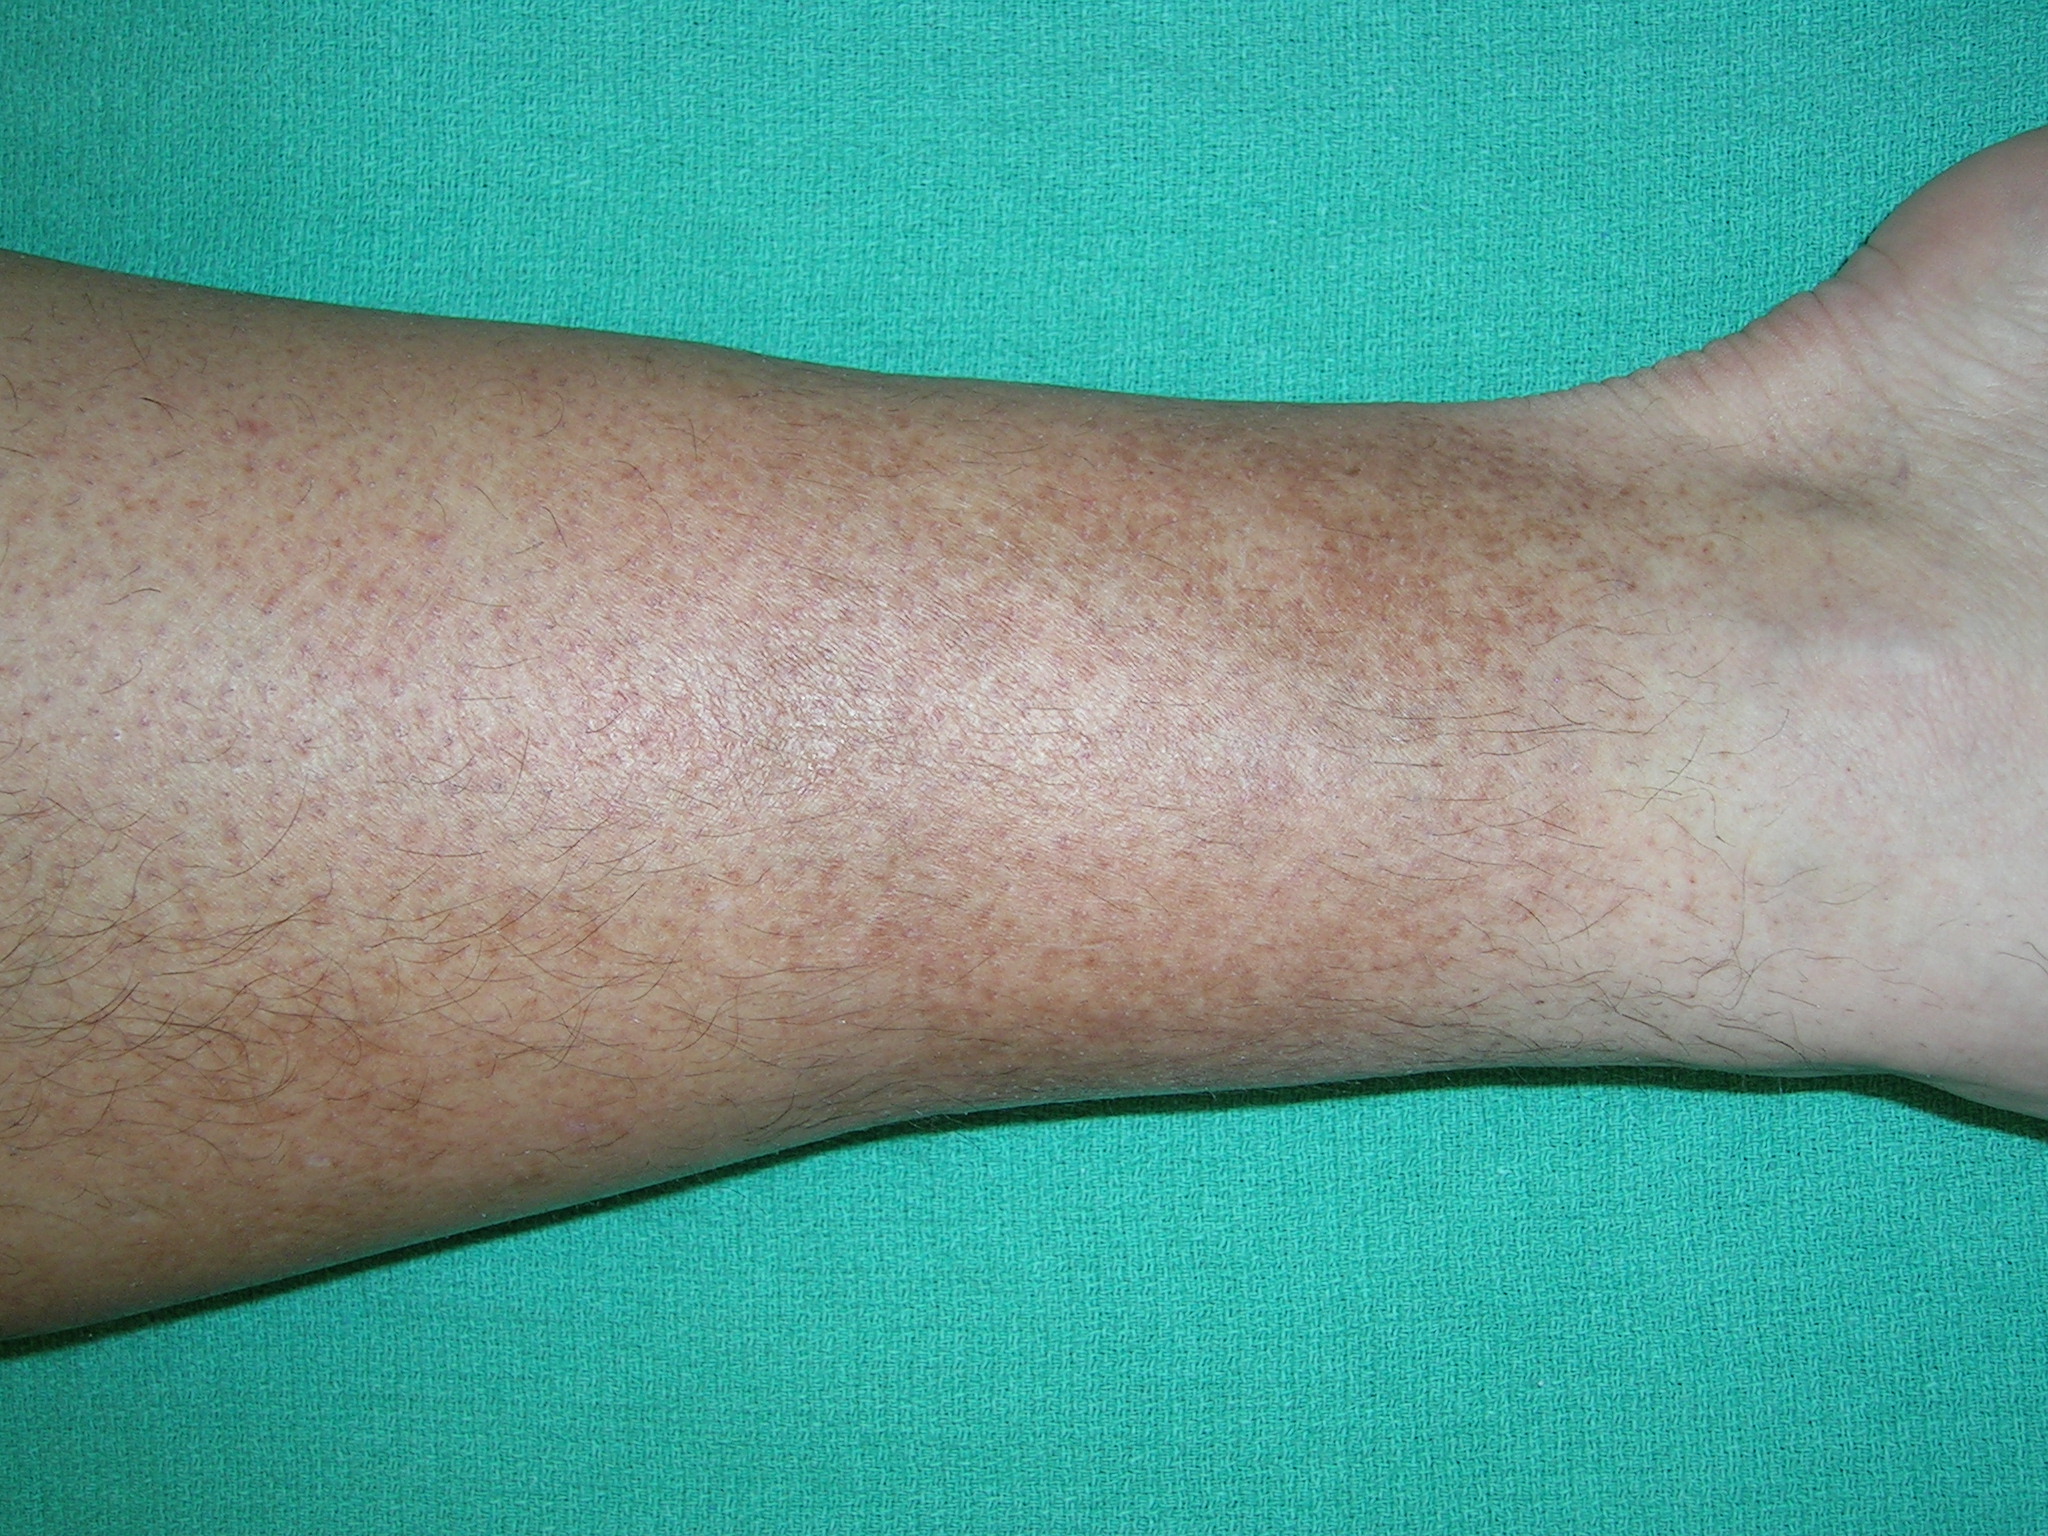 Leg Discoloration Treatment and Causes  Leg Discoloration Specialist  Maryland